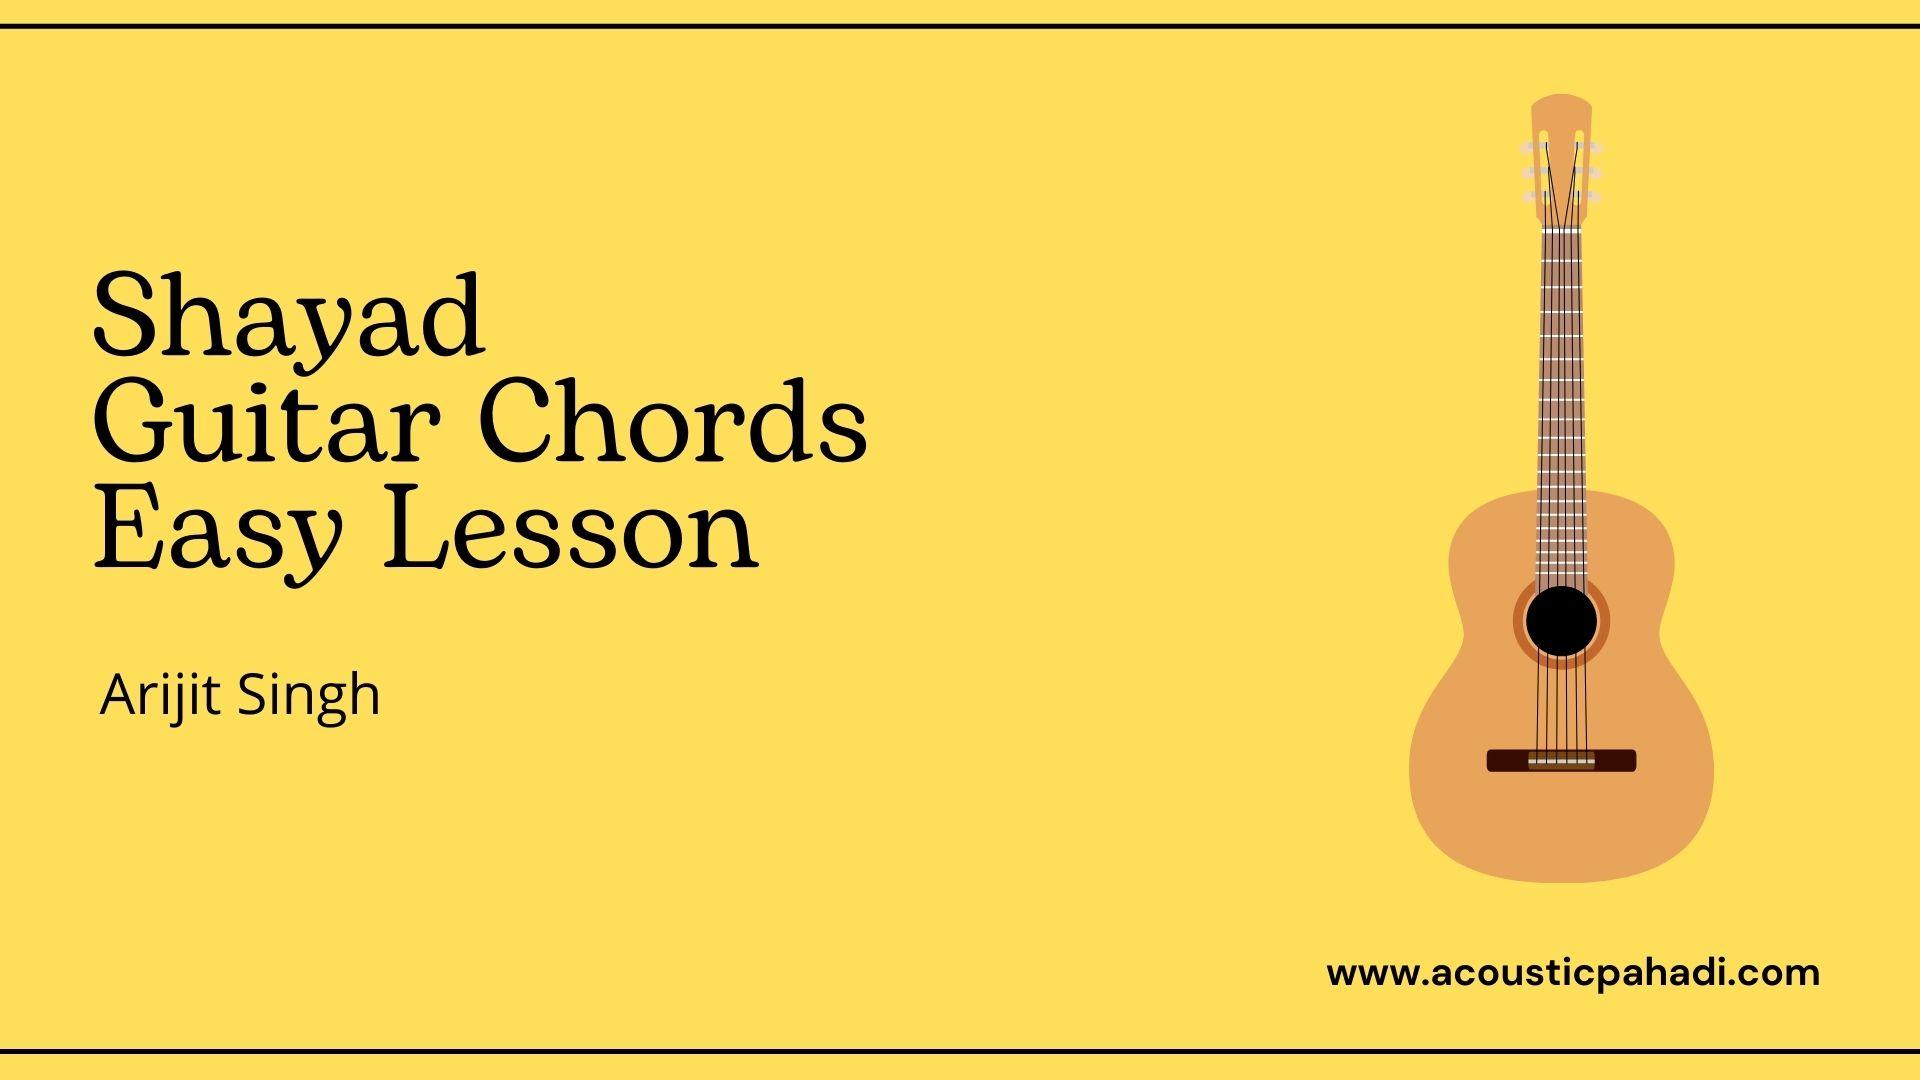 Shayad Guitar Chords Without Capo with Strumming Pattern